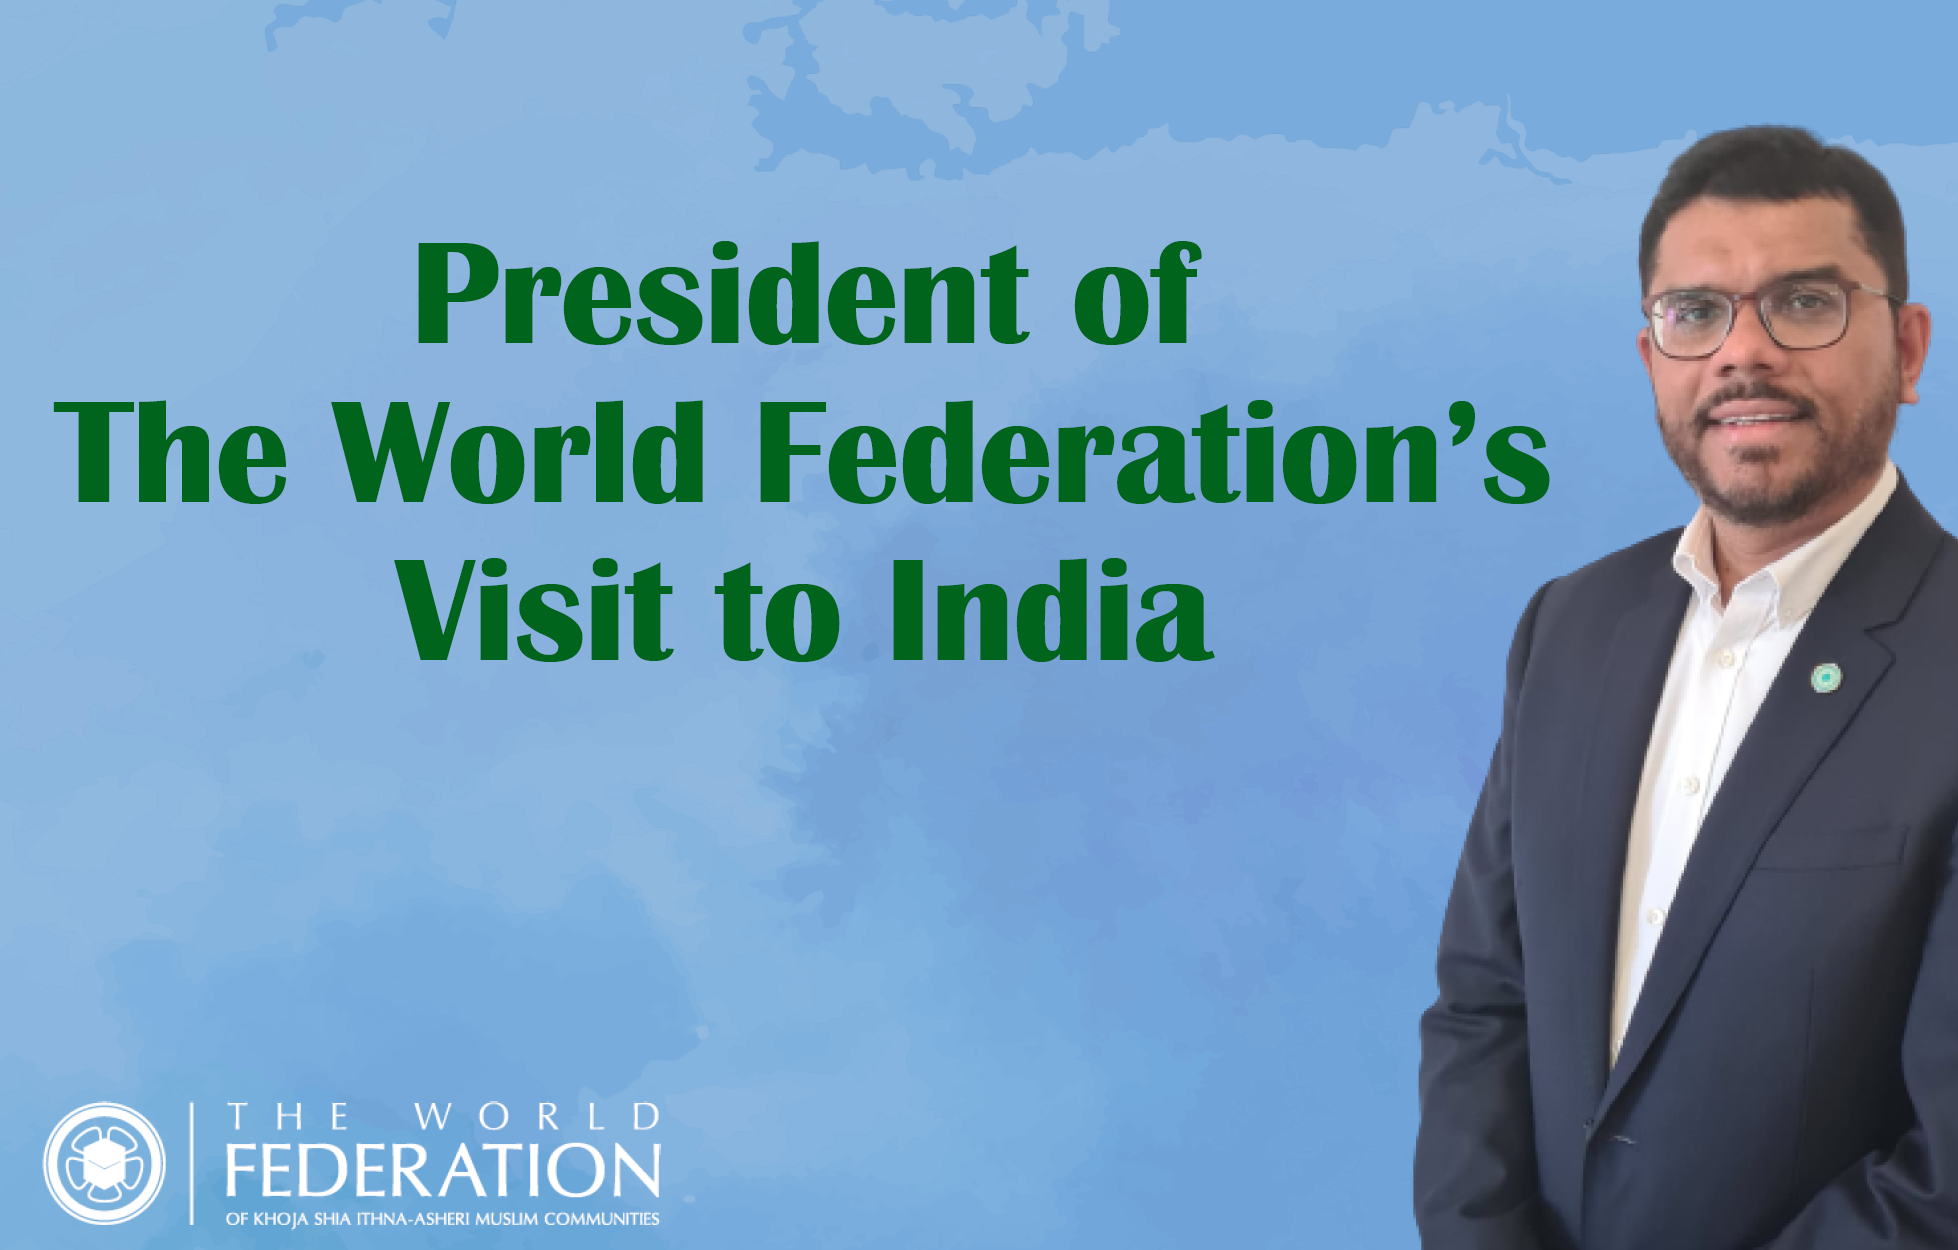 President’s visit to India